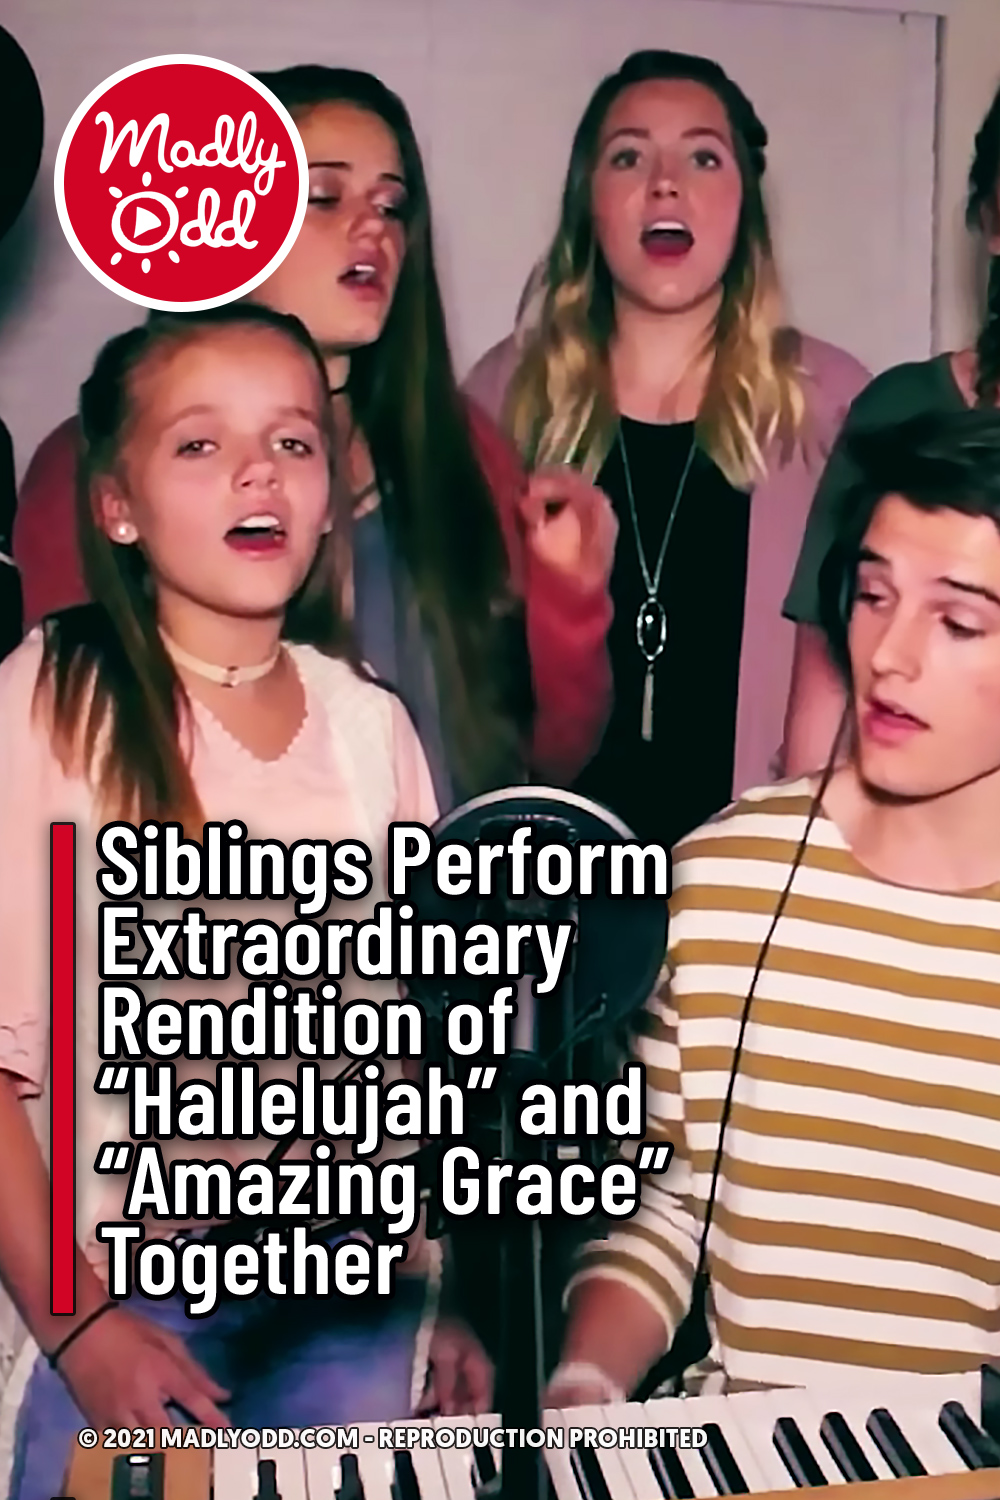 Siblings Perform Extraordinary Rendition of “Hallelujah” and “Amazing Grace” Together